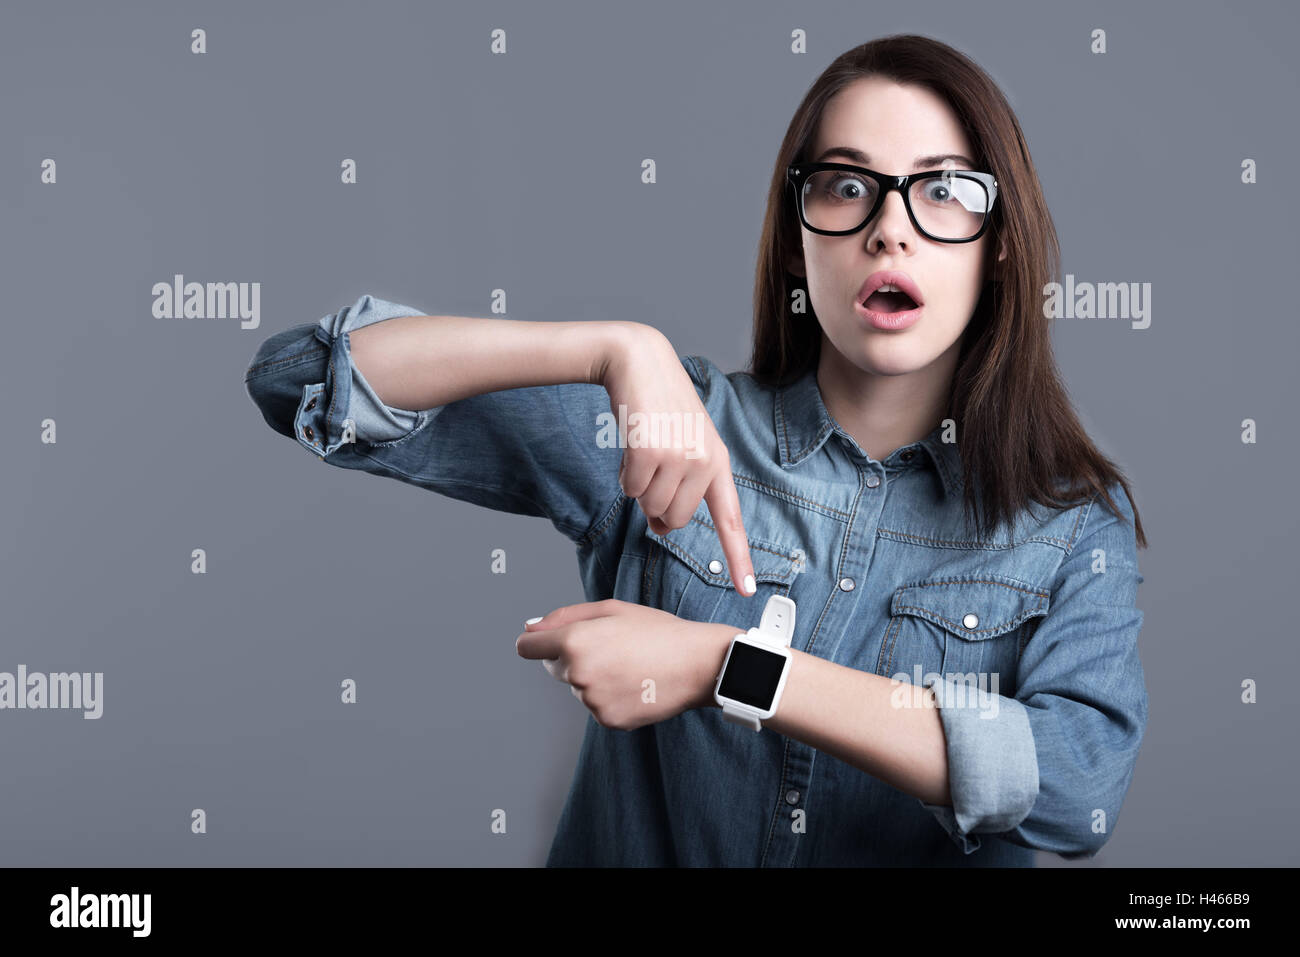 Surprised young woman wearing smartwatch Stock Photo